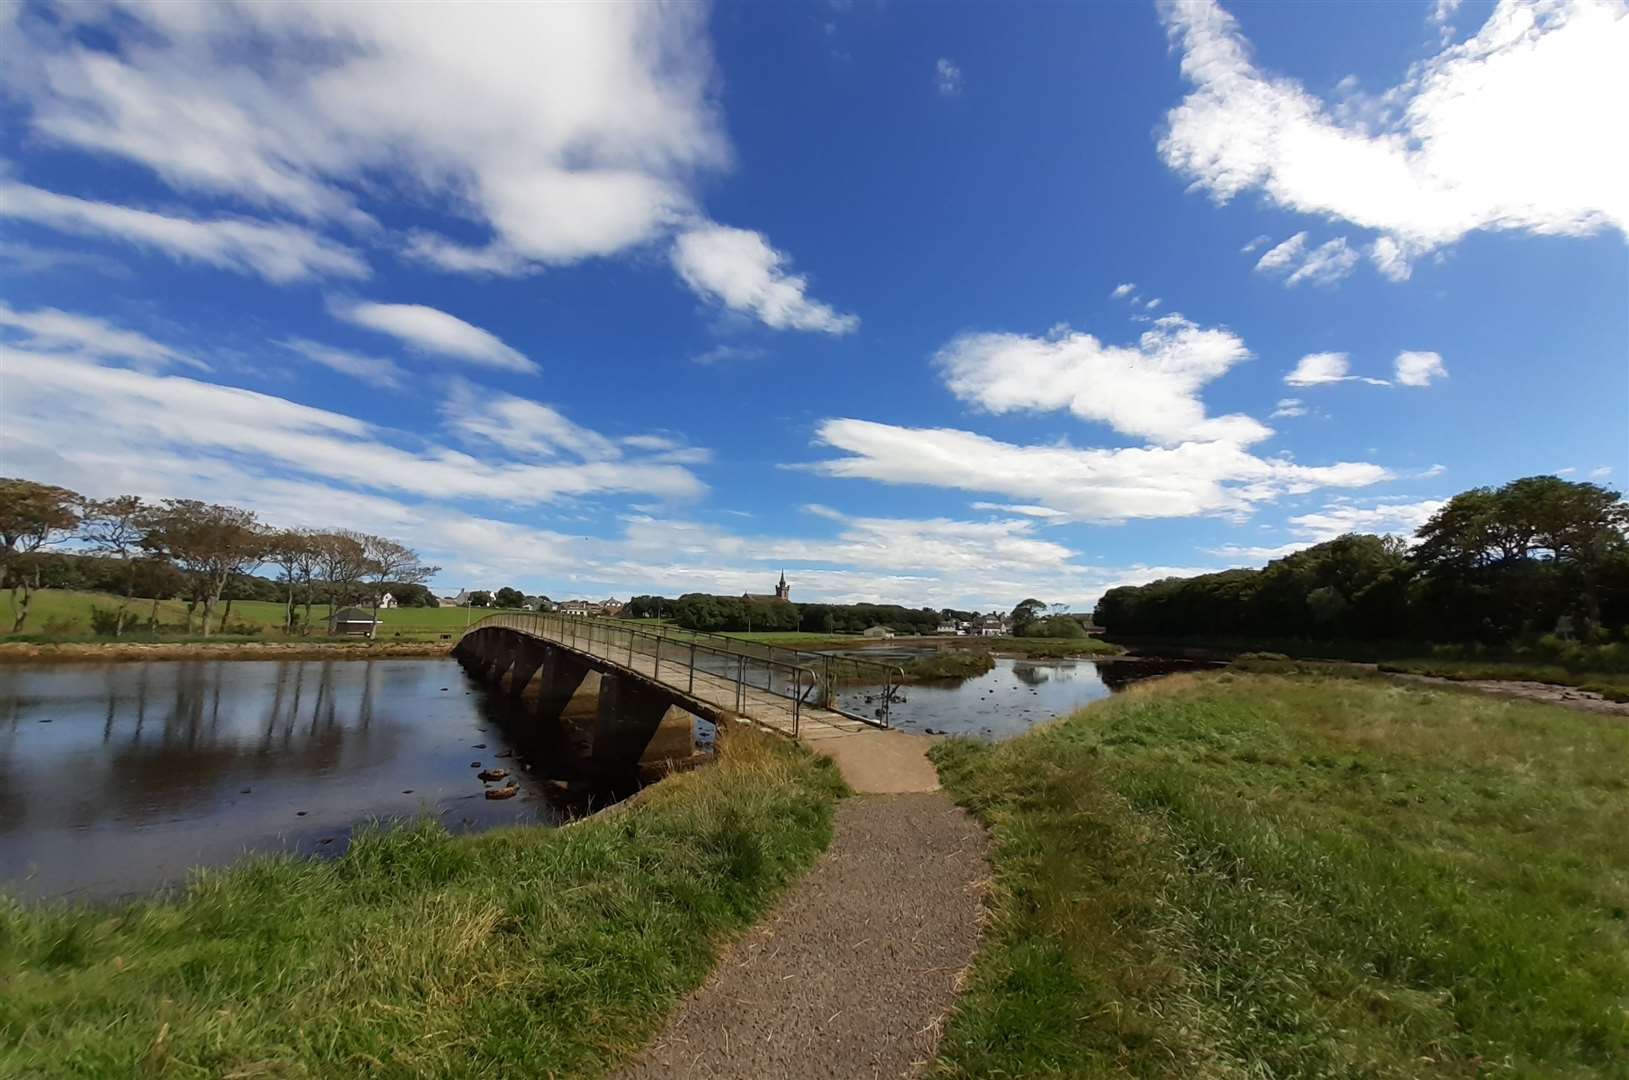 The main Coghill bridge at Wick riverside, photographed on Sunday.